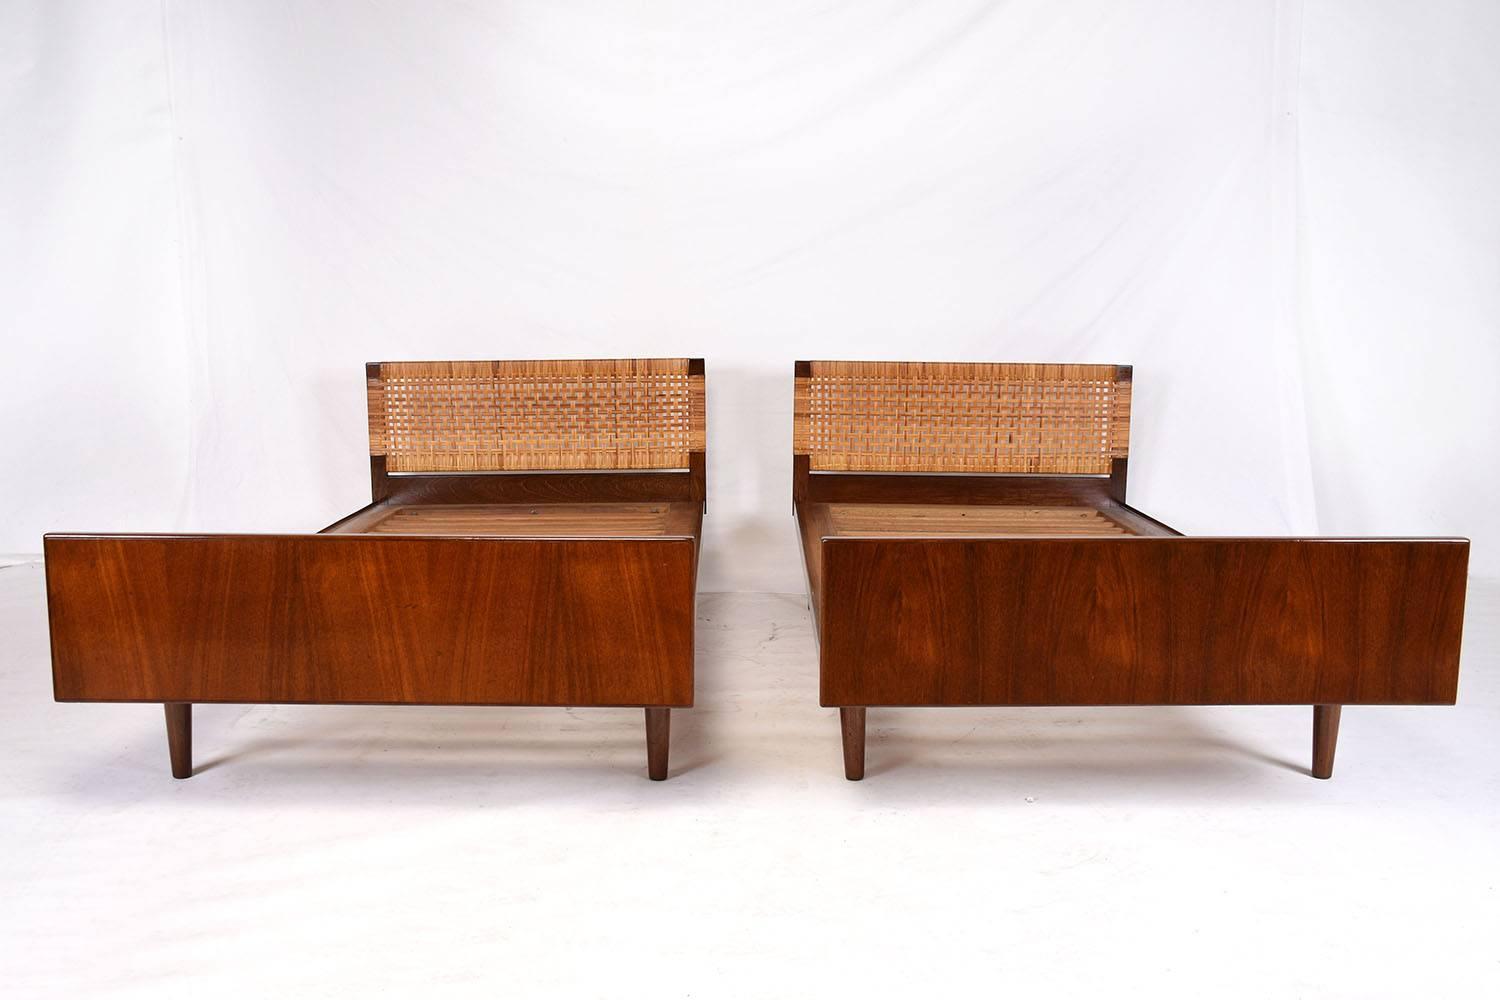 This 1960s Danish Mid-Century Modern-style pair of twin beds feature walnut wood frames in a Classic style. The frames have been stained in a rich walnut color with a lacquered finish. The headboard is uniquely decorated with caning details. The bed